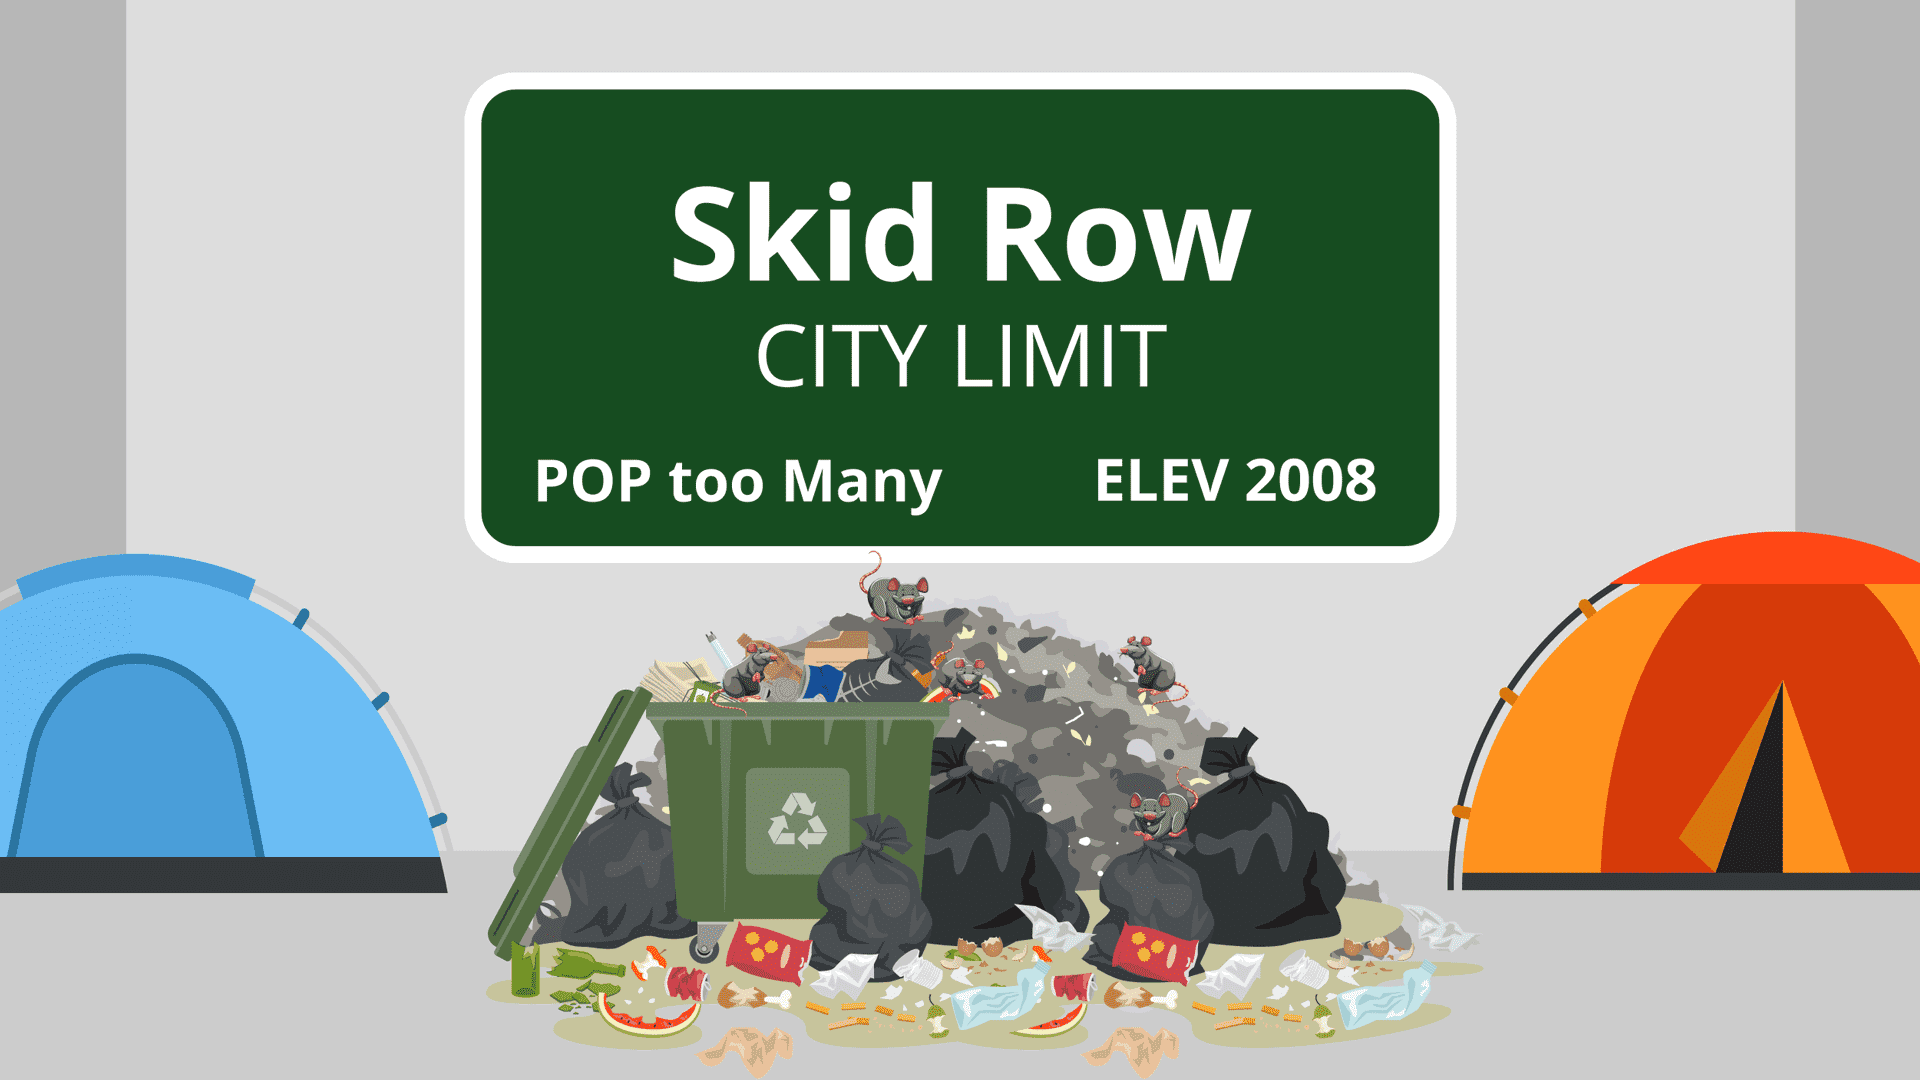 Illustration of trash and rats at Skid Row in Los Angeles, CA. 